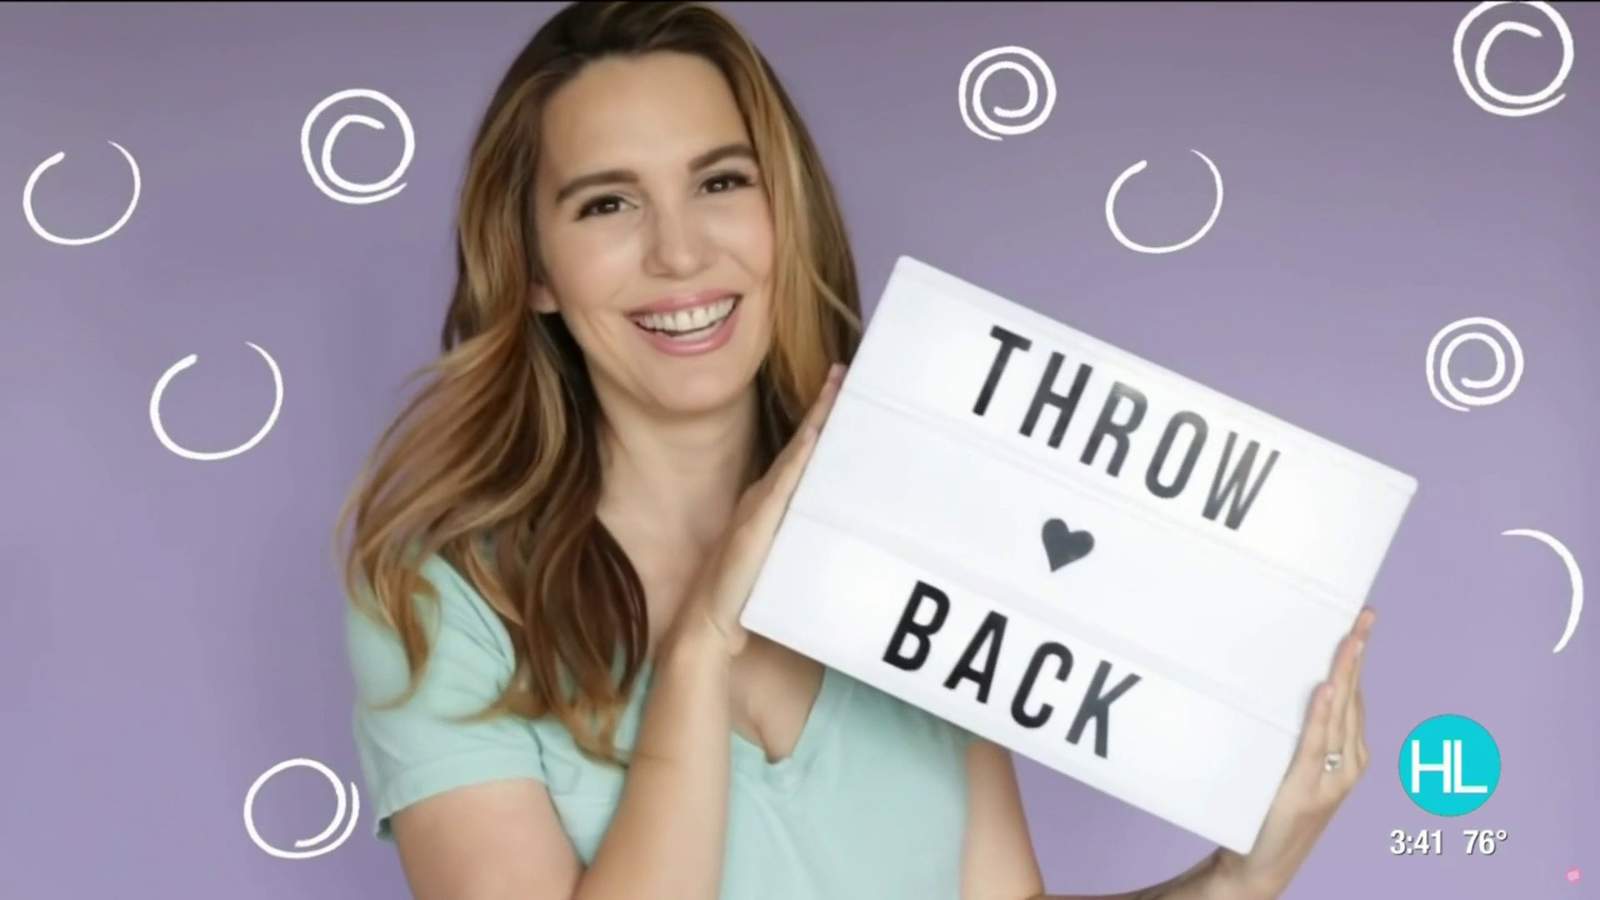 Actress, singer, and Broadway star Christy Carlson Romano takes us down 90’s memory lane